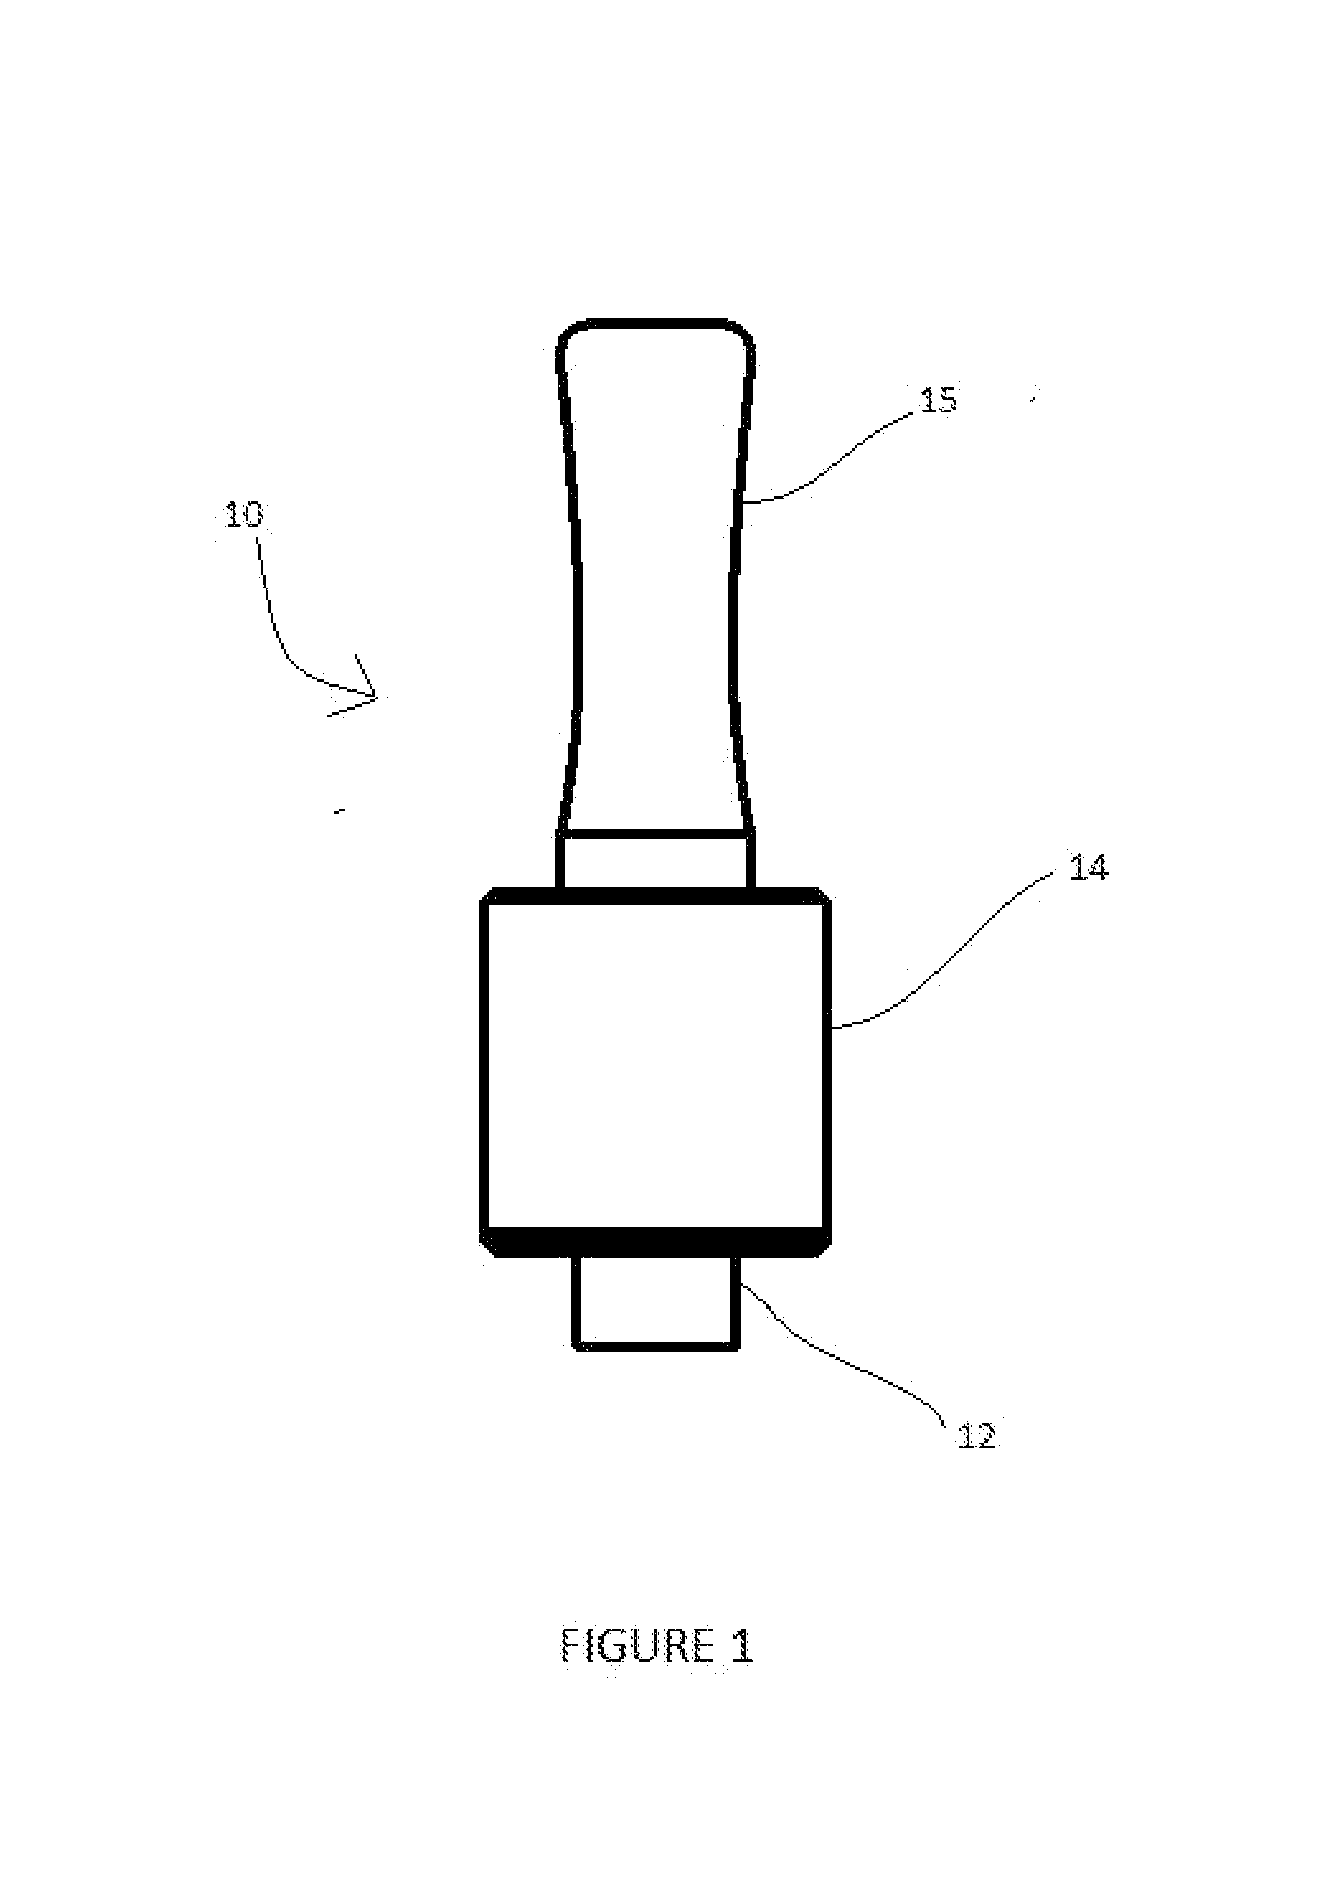 Breathable Fluid Delivery System Including Exchangeable Fluid Permeable Cartridge